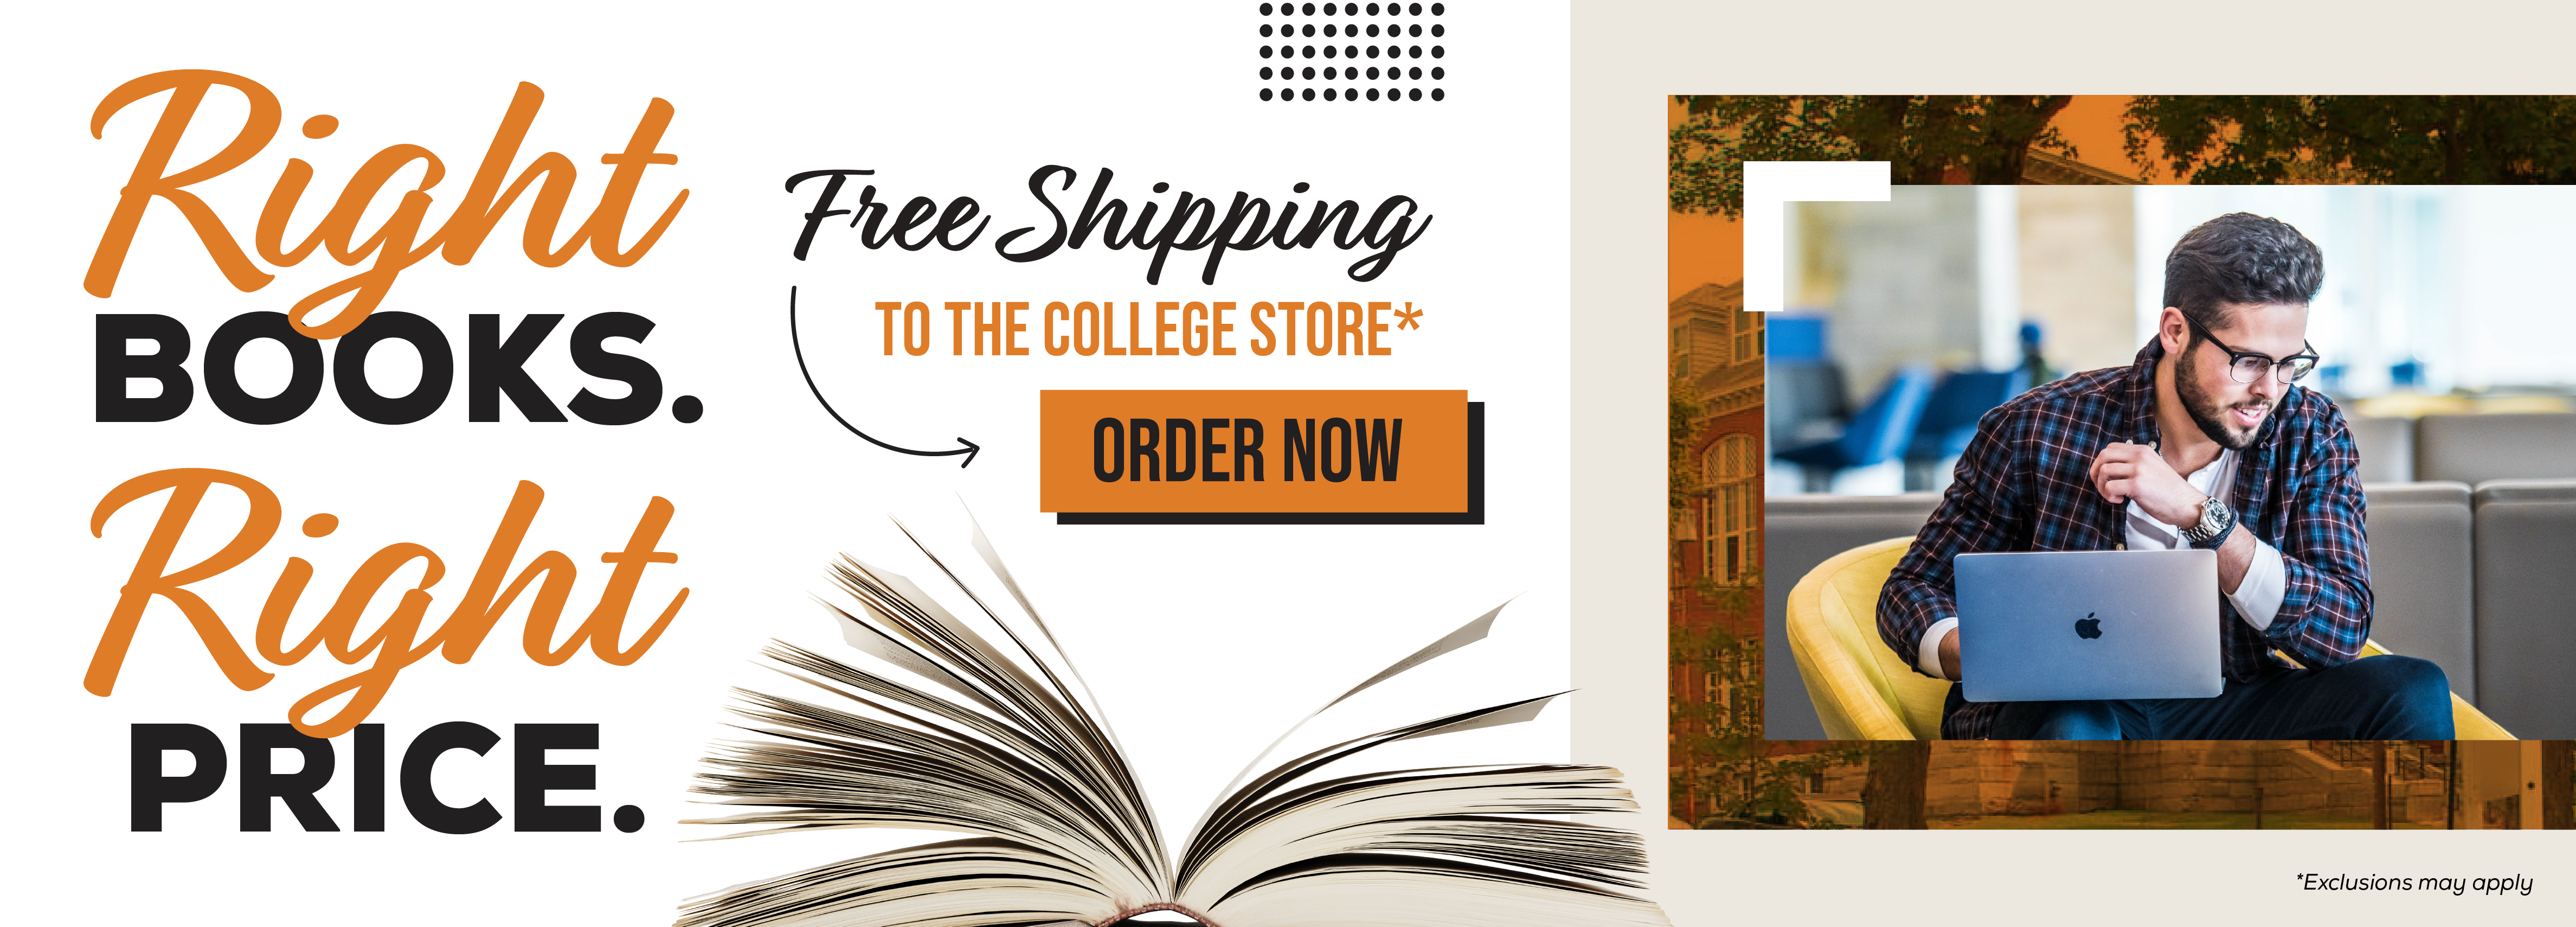 Right books. Right price. Free shipping to The College Store.* Order now. *Exclusions may apply.